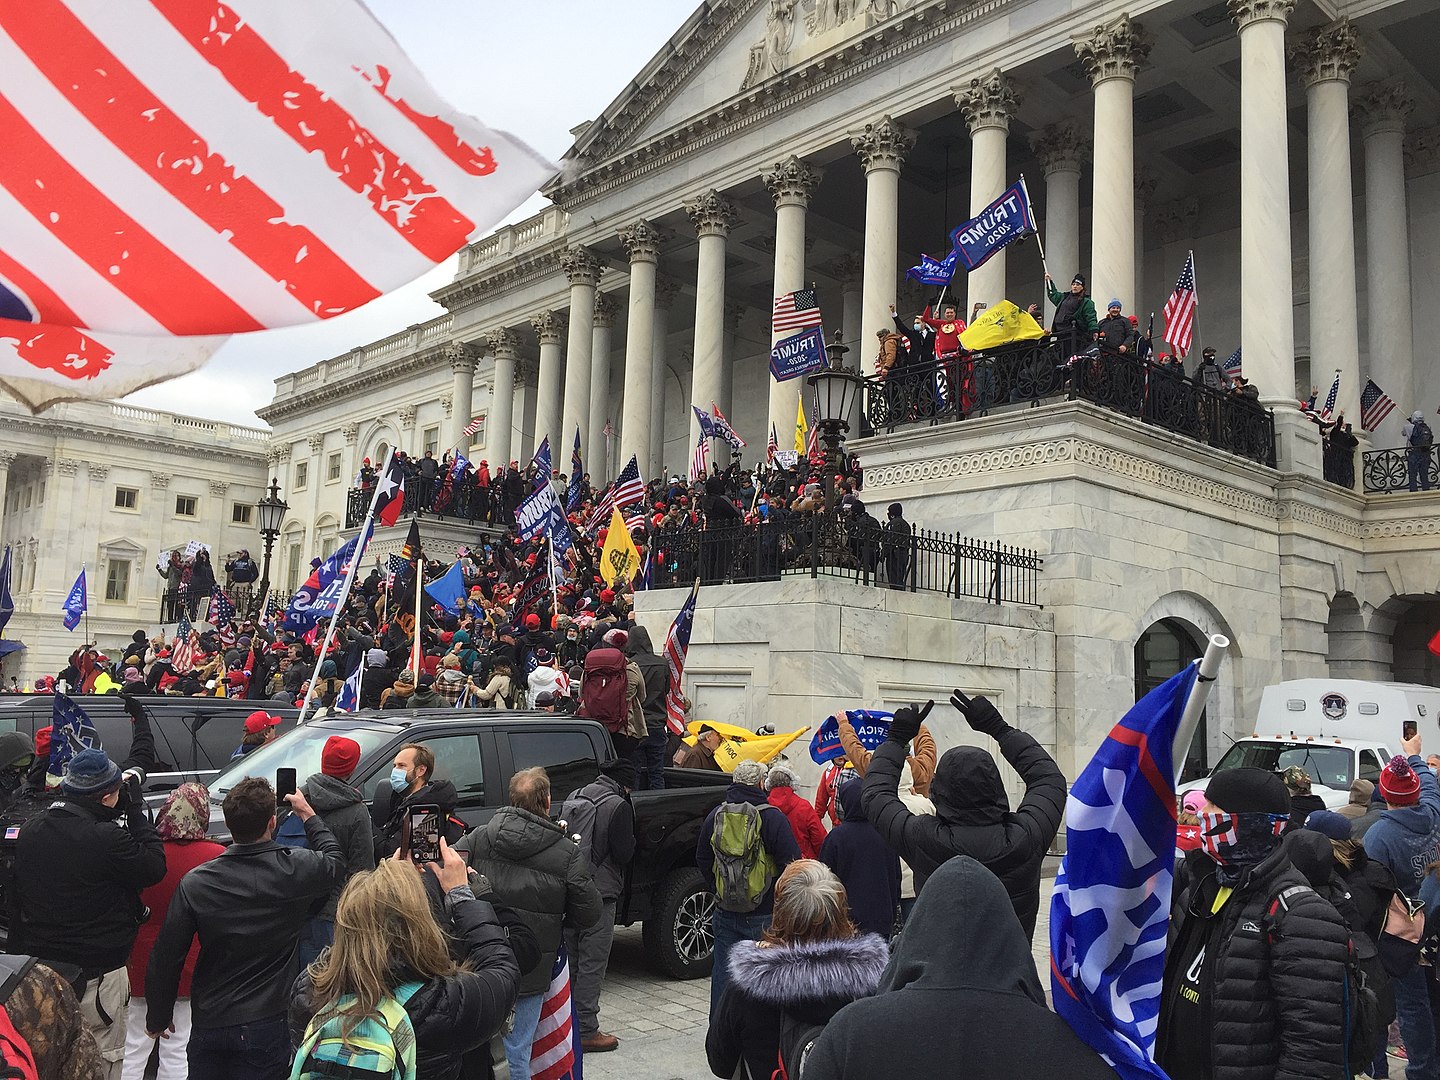 Trump supporters crowding the steps of the Capitol